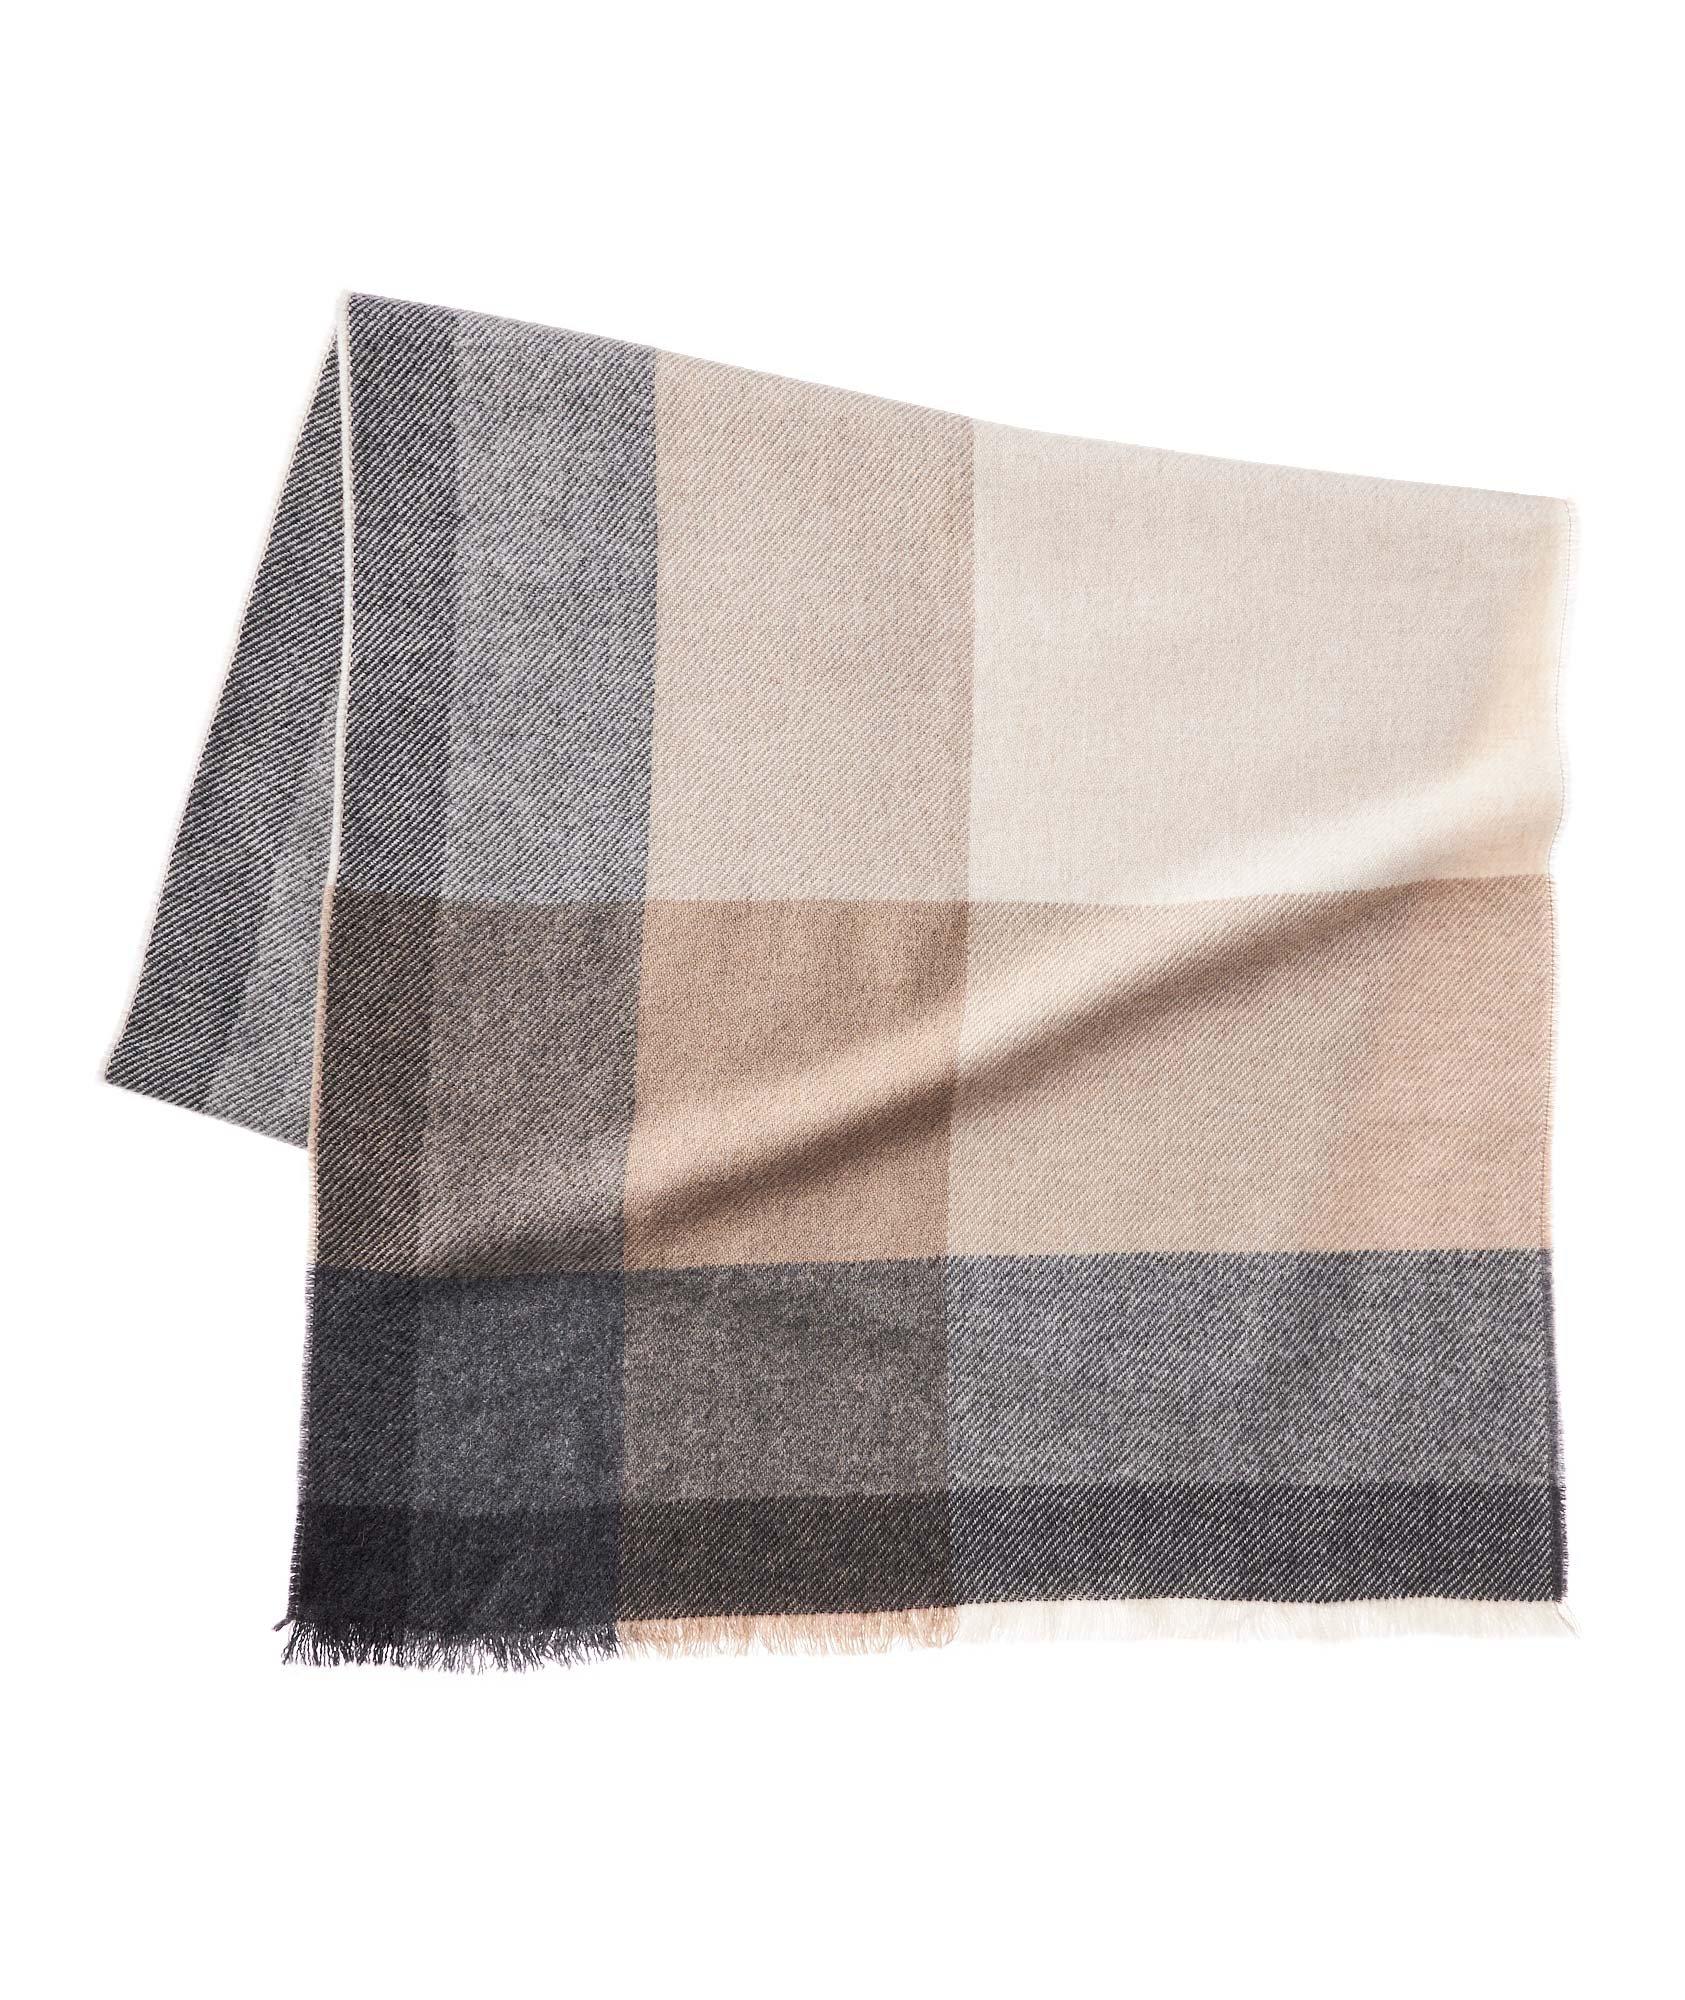 Checked Wool-Cashmere Scarf image 0